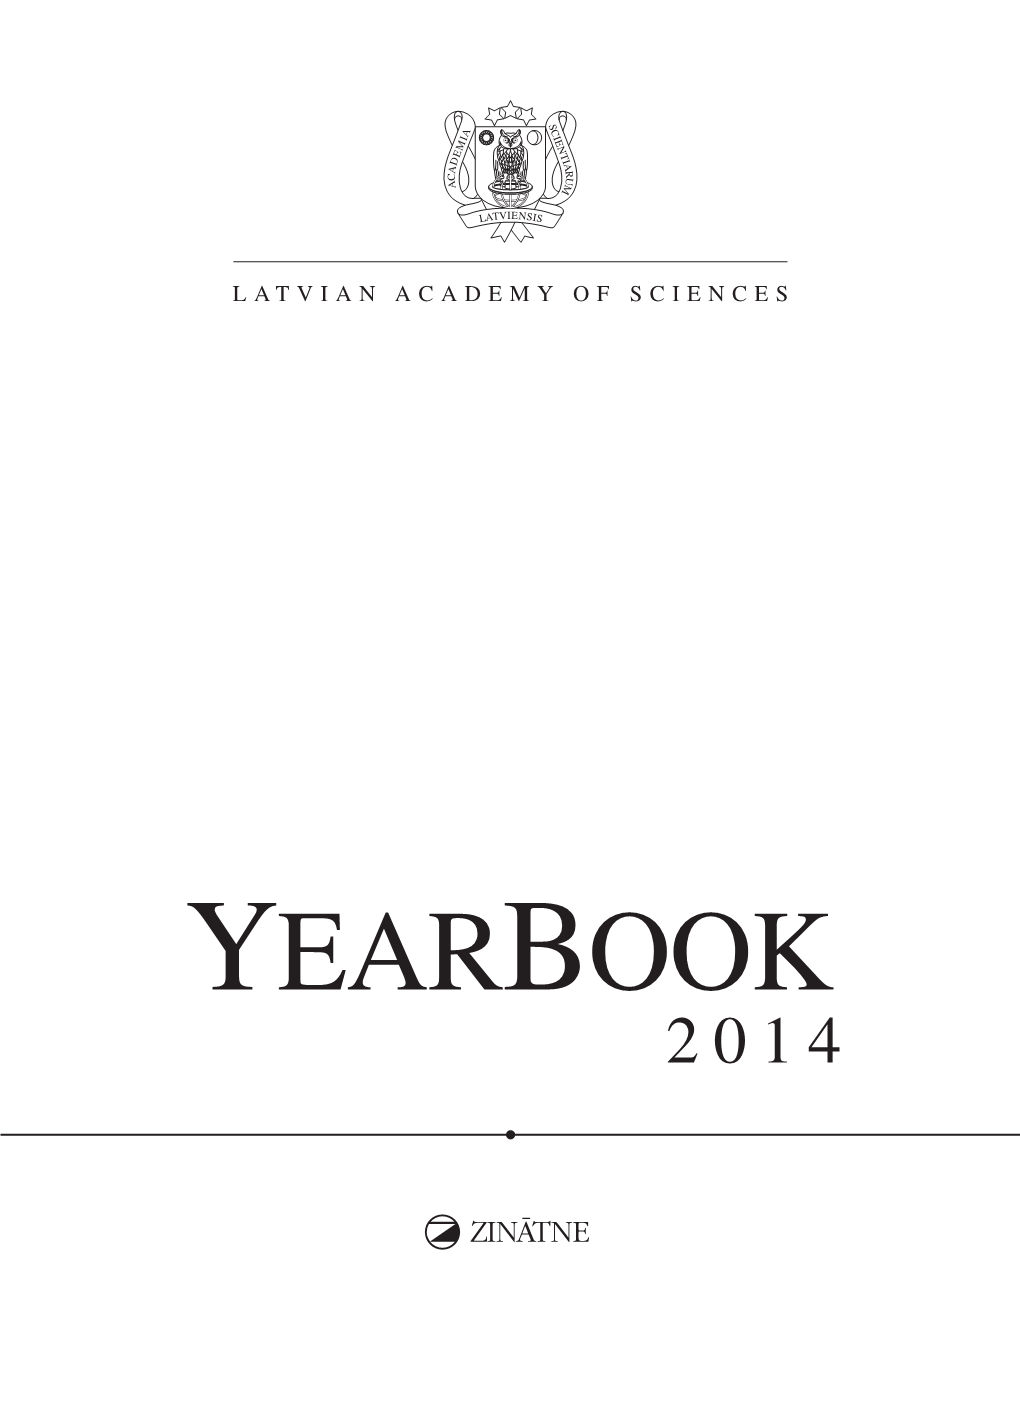 Yearbook 2014.Pdf